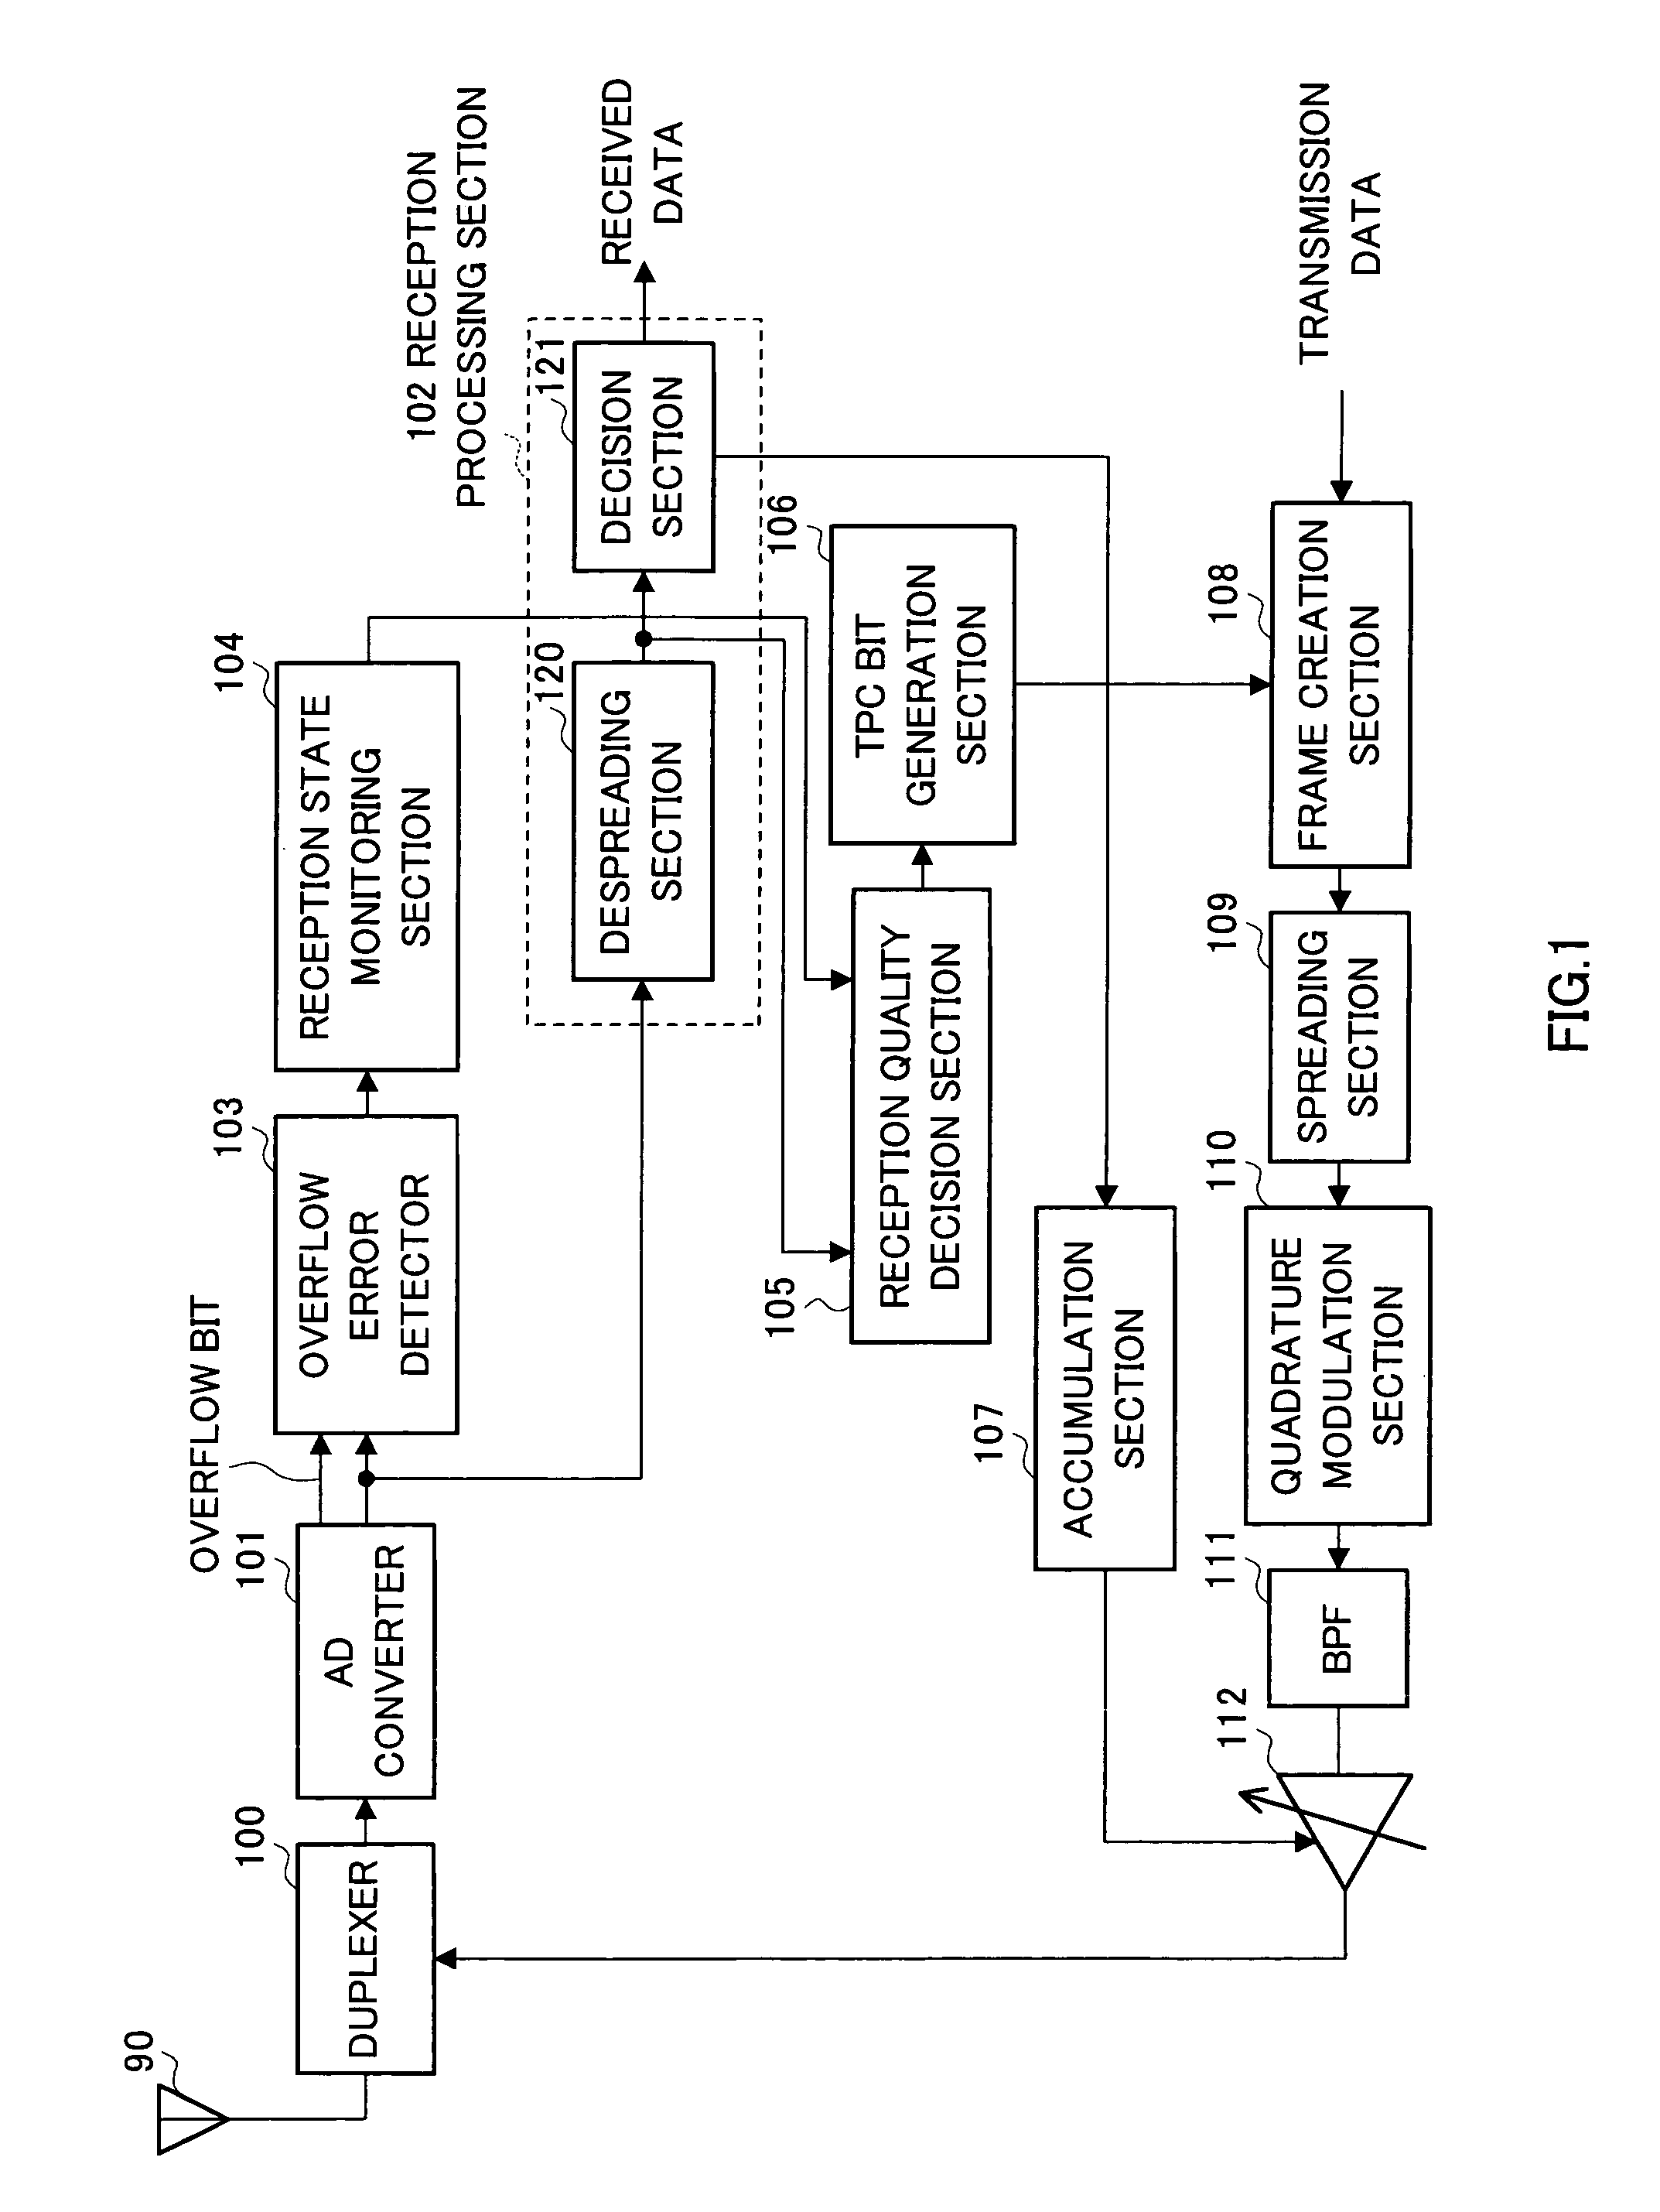 Method for controlling generation of transmission power control information, method of controlling characteristics of receiver circuit based on overflow information, and CDMA communication apparatus